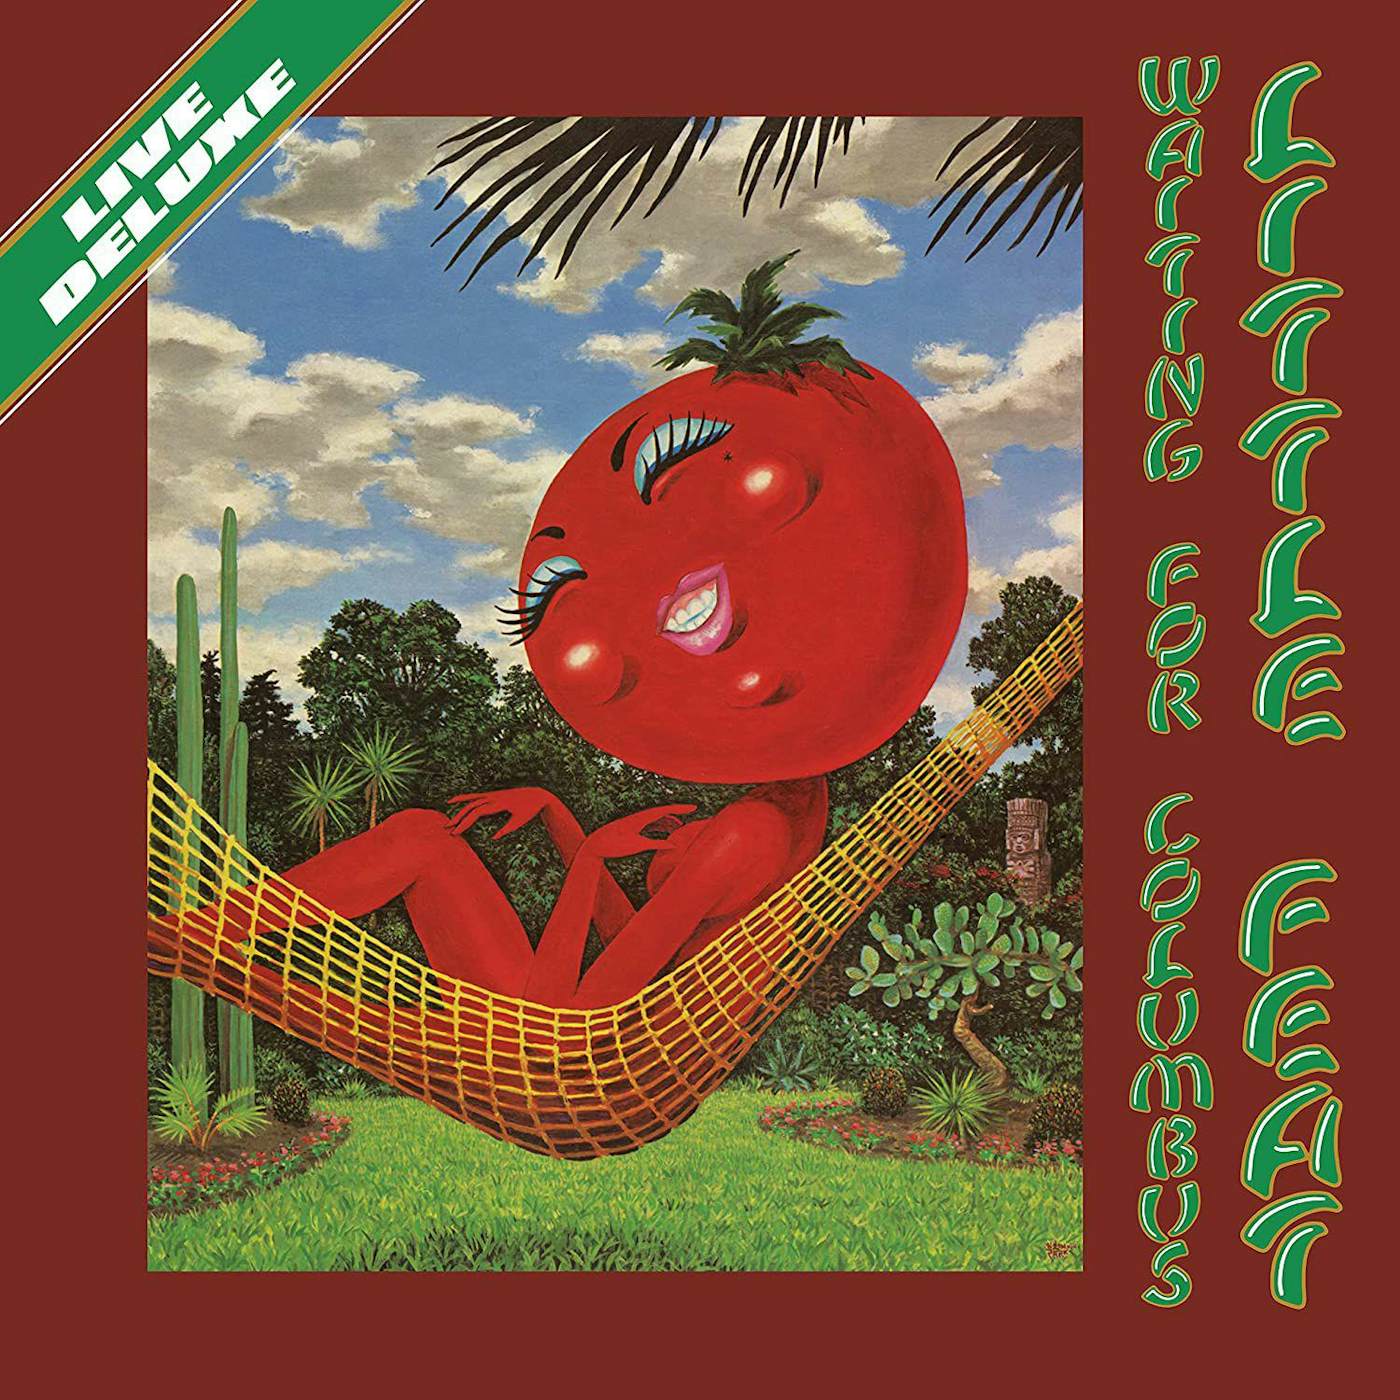 Little Feat Waiting For Columbus (Super Deluxe Edition/8cd) (Box Set)